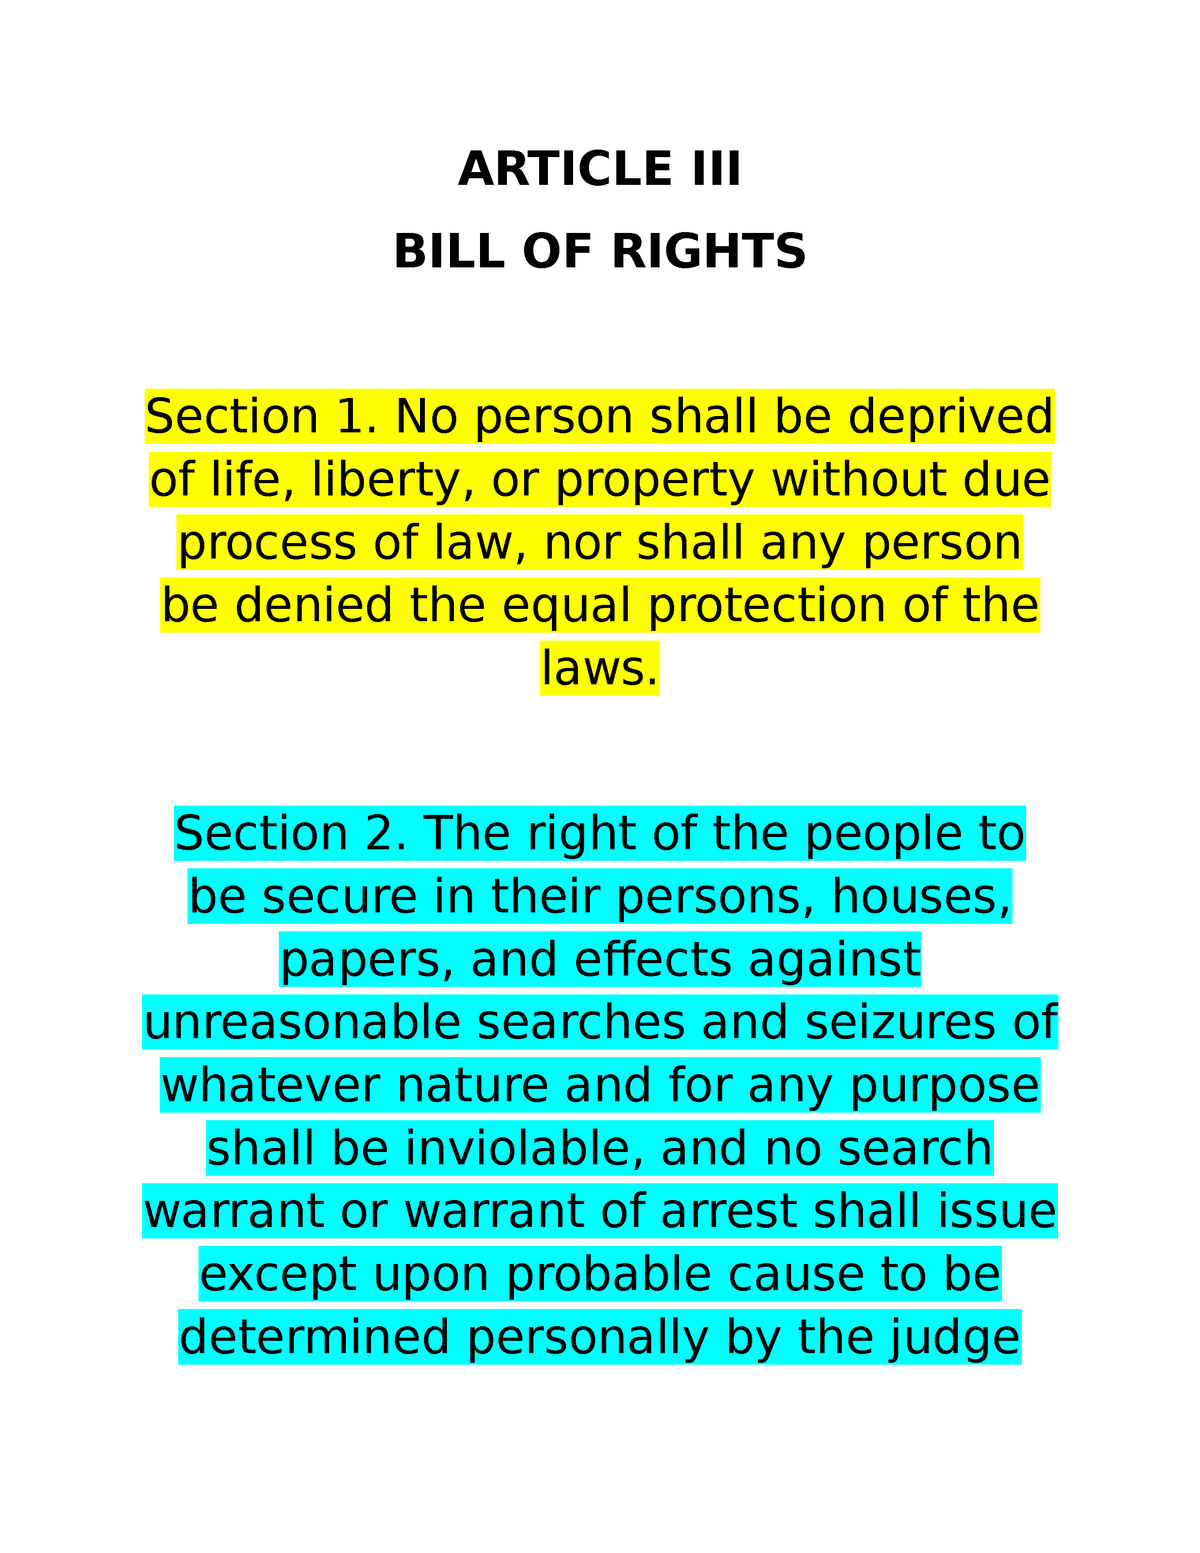 1987-constitution-article-iii-article-iii-bill-of-rights-section-1